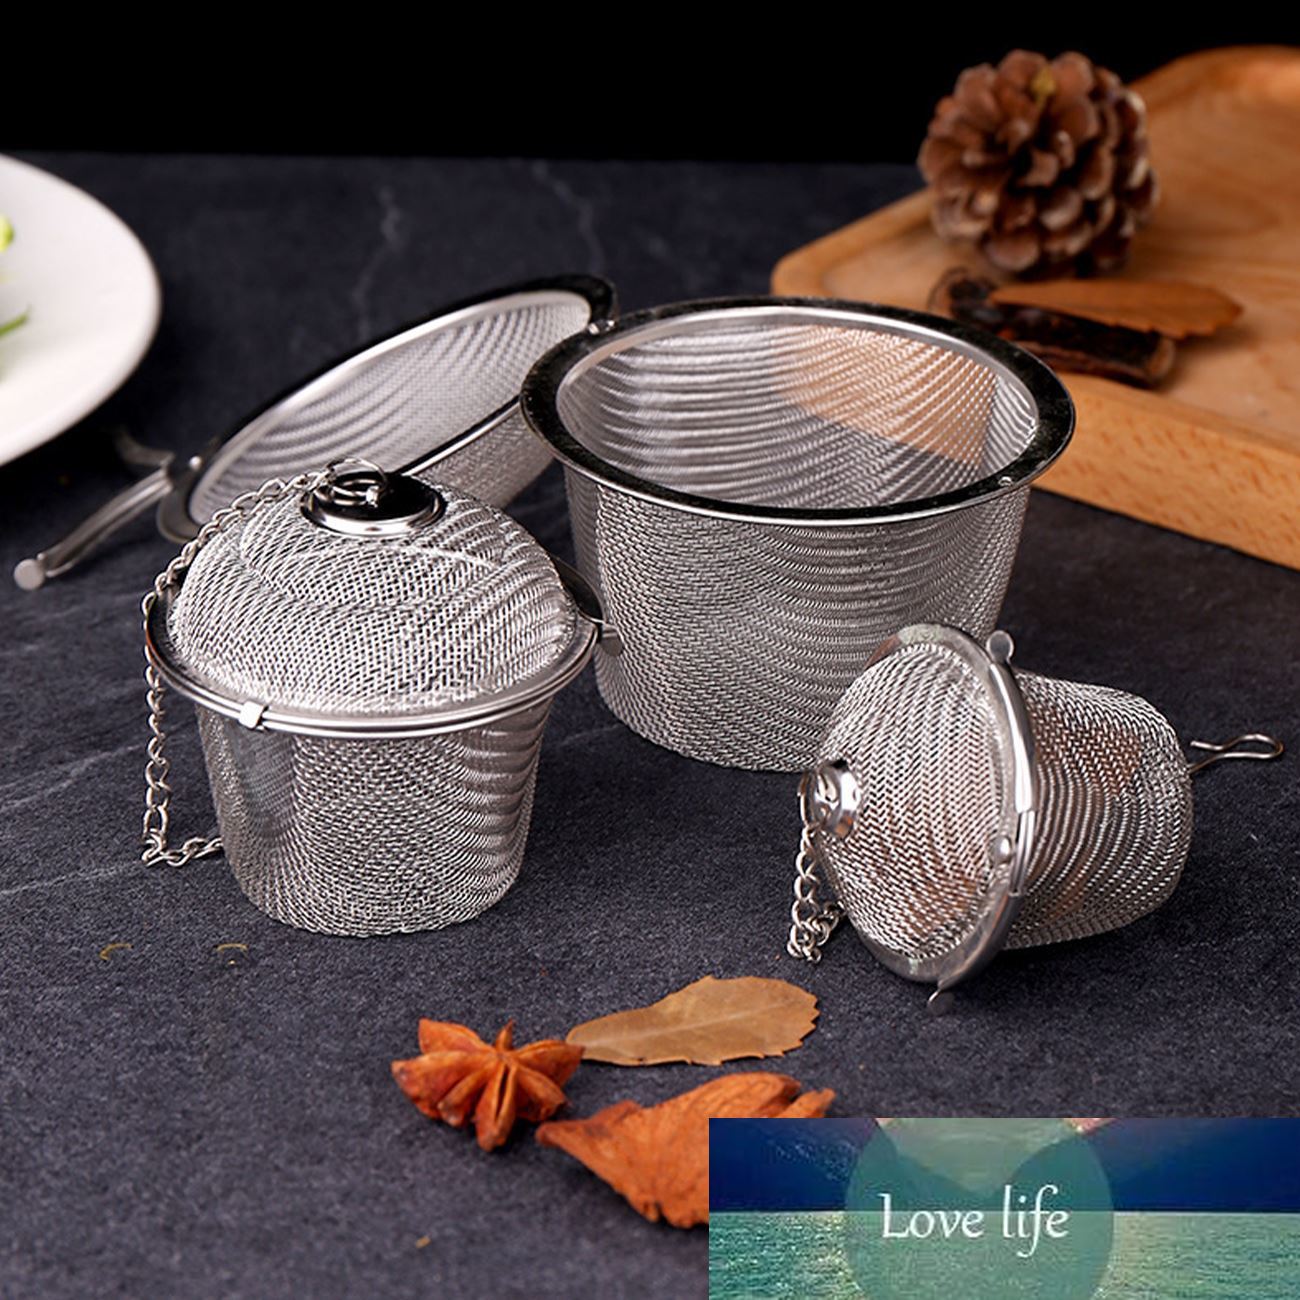 

1pc Stainless Steel Tea Infuser Sphere Locking Spice Tea Ball Strainer Mesh Infuser Filter Strainers Kitchen Tools Reusable